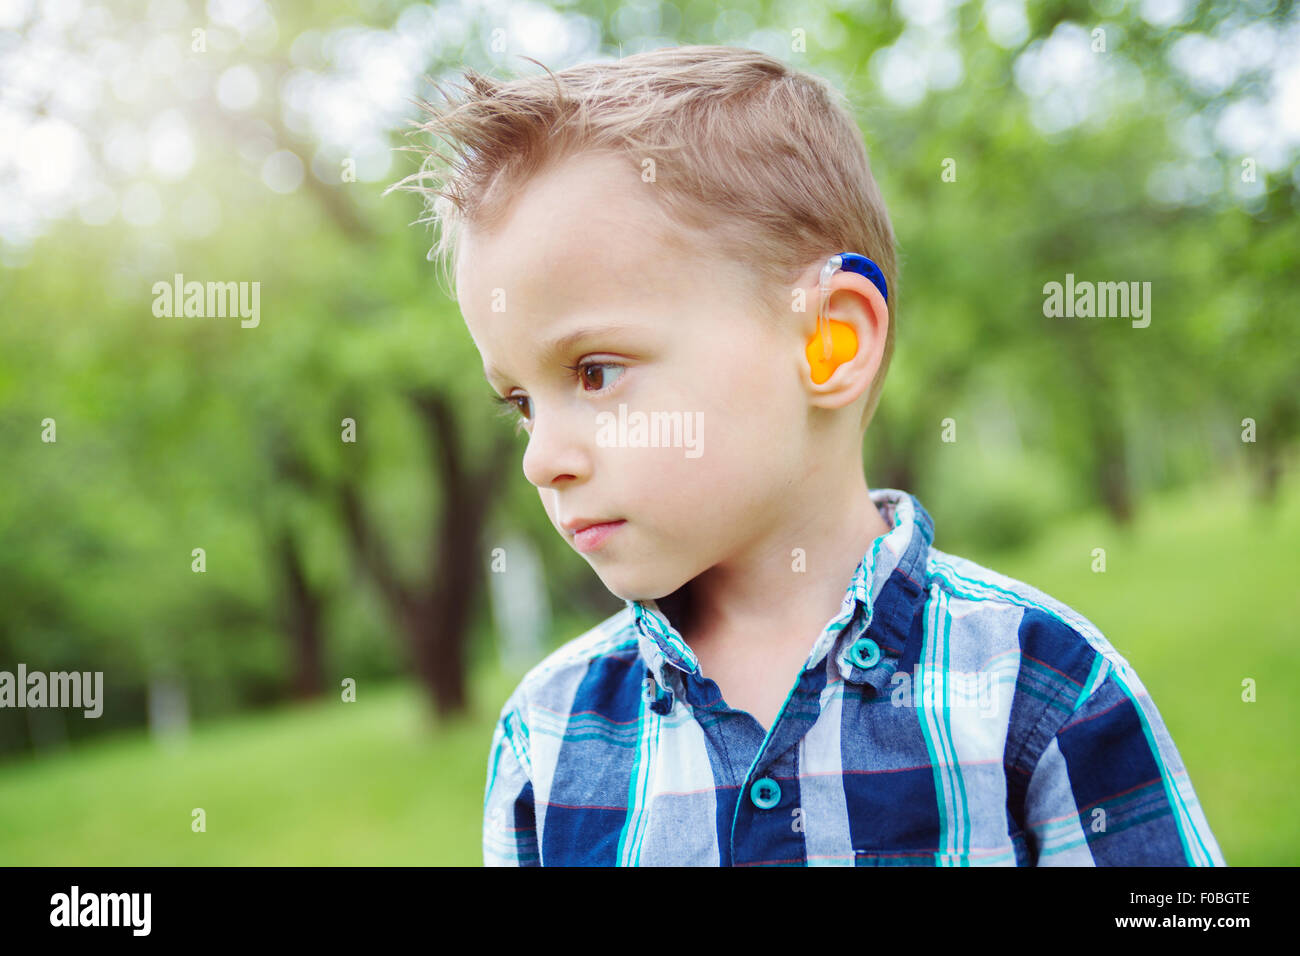 Portrait of cute little boy child outdoors on the nature Stock Photo